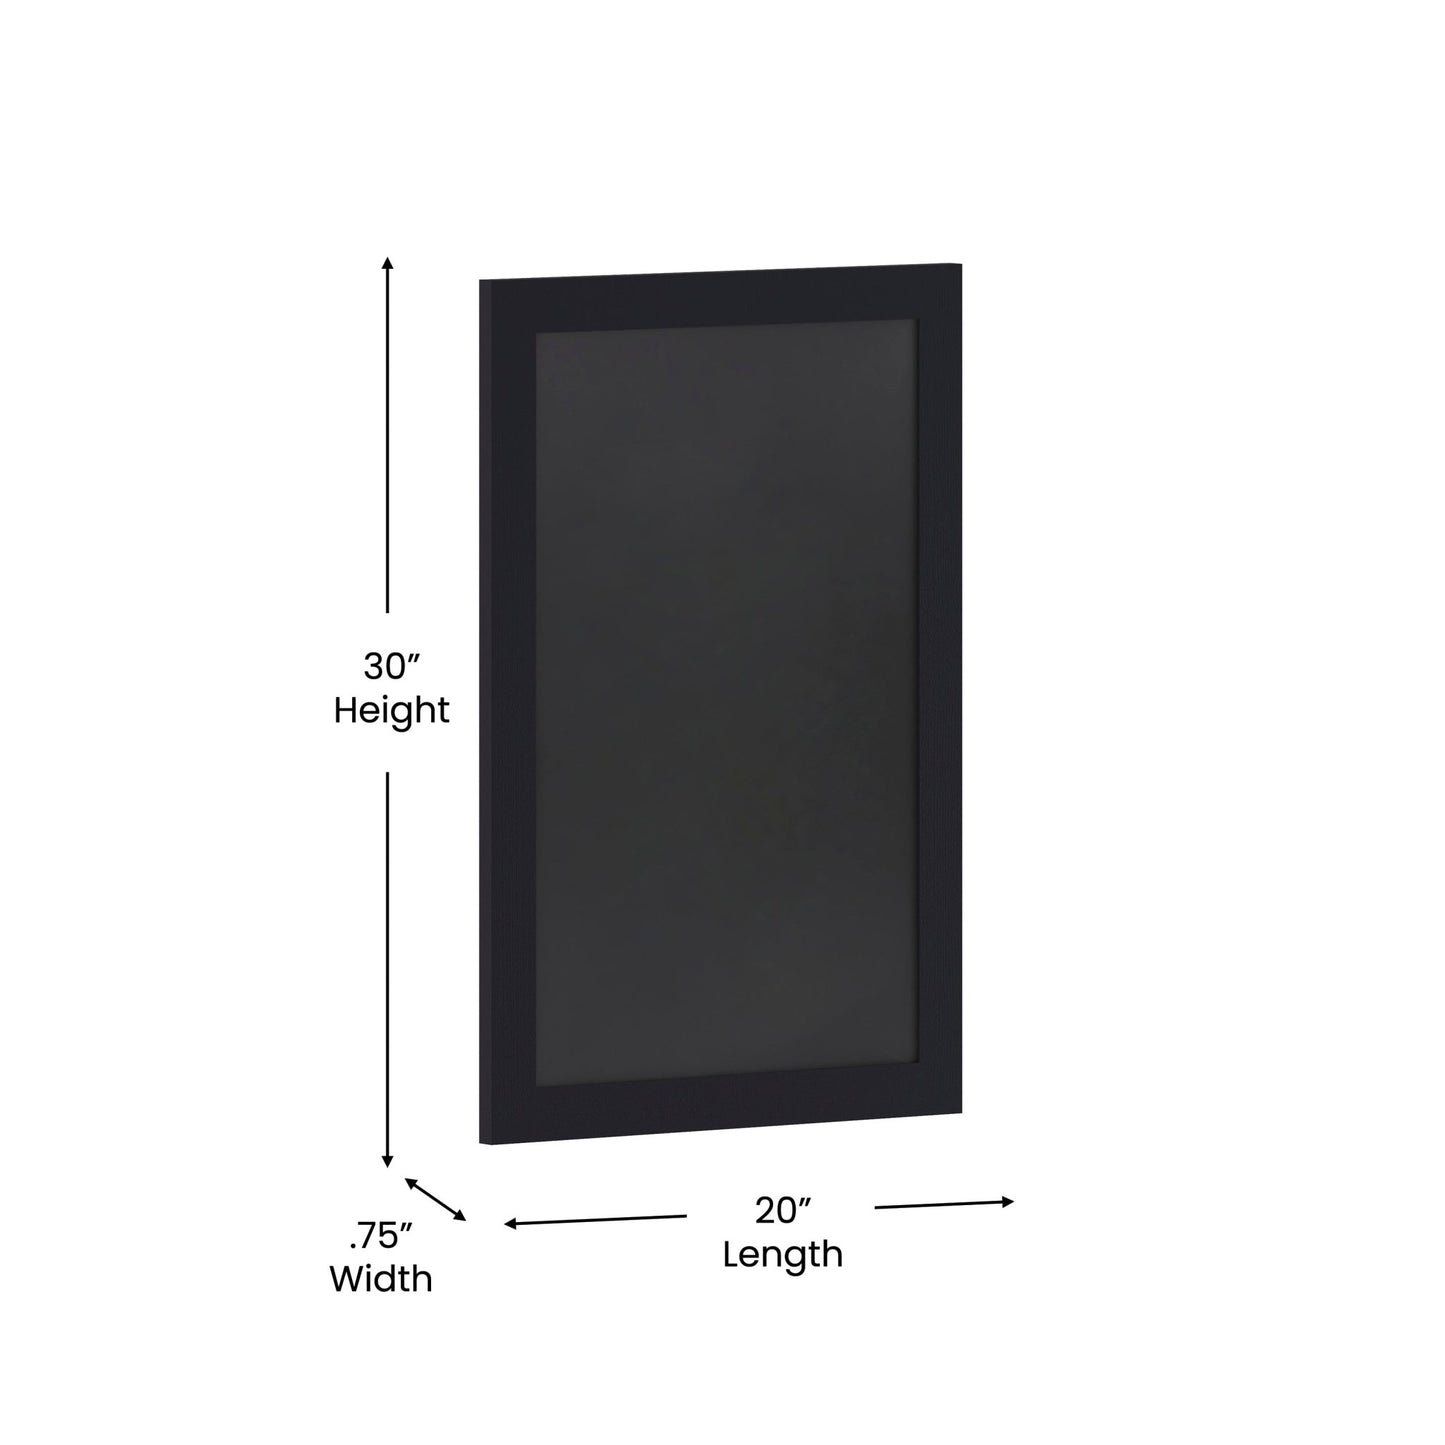 Canterbury 20" x 30" Wall Mount Magnetic Chalkboard Sign with Eraser, Hanging Wall Chalkboard Memo Board for Home, School, or Business - SchoolOutlet